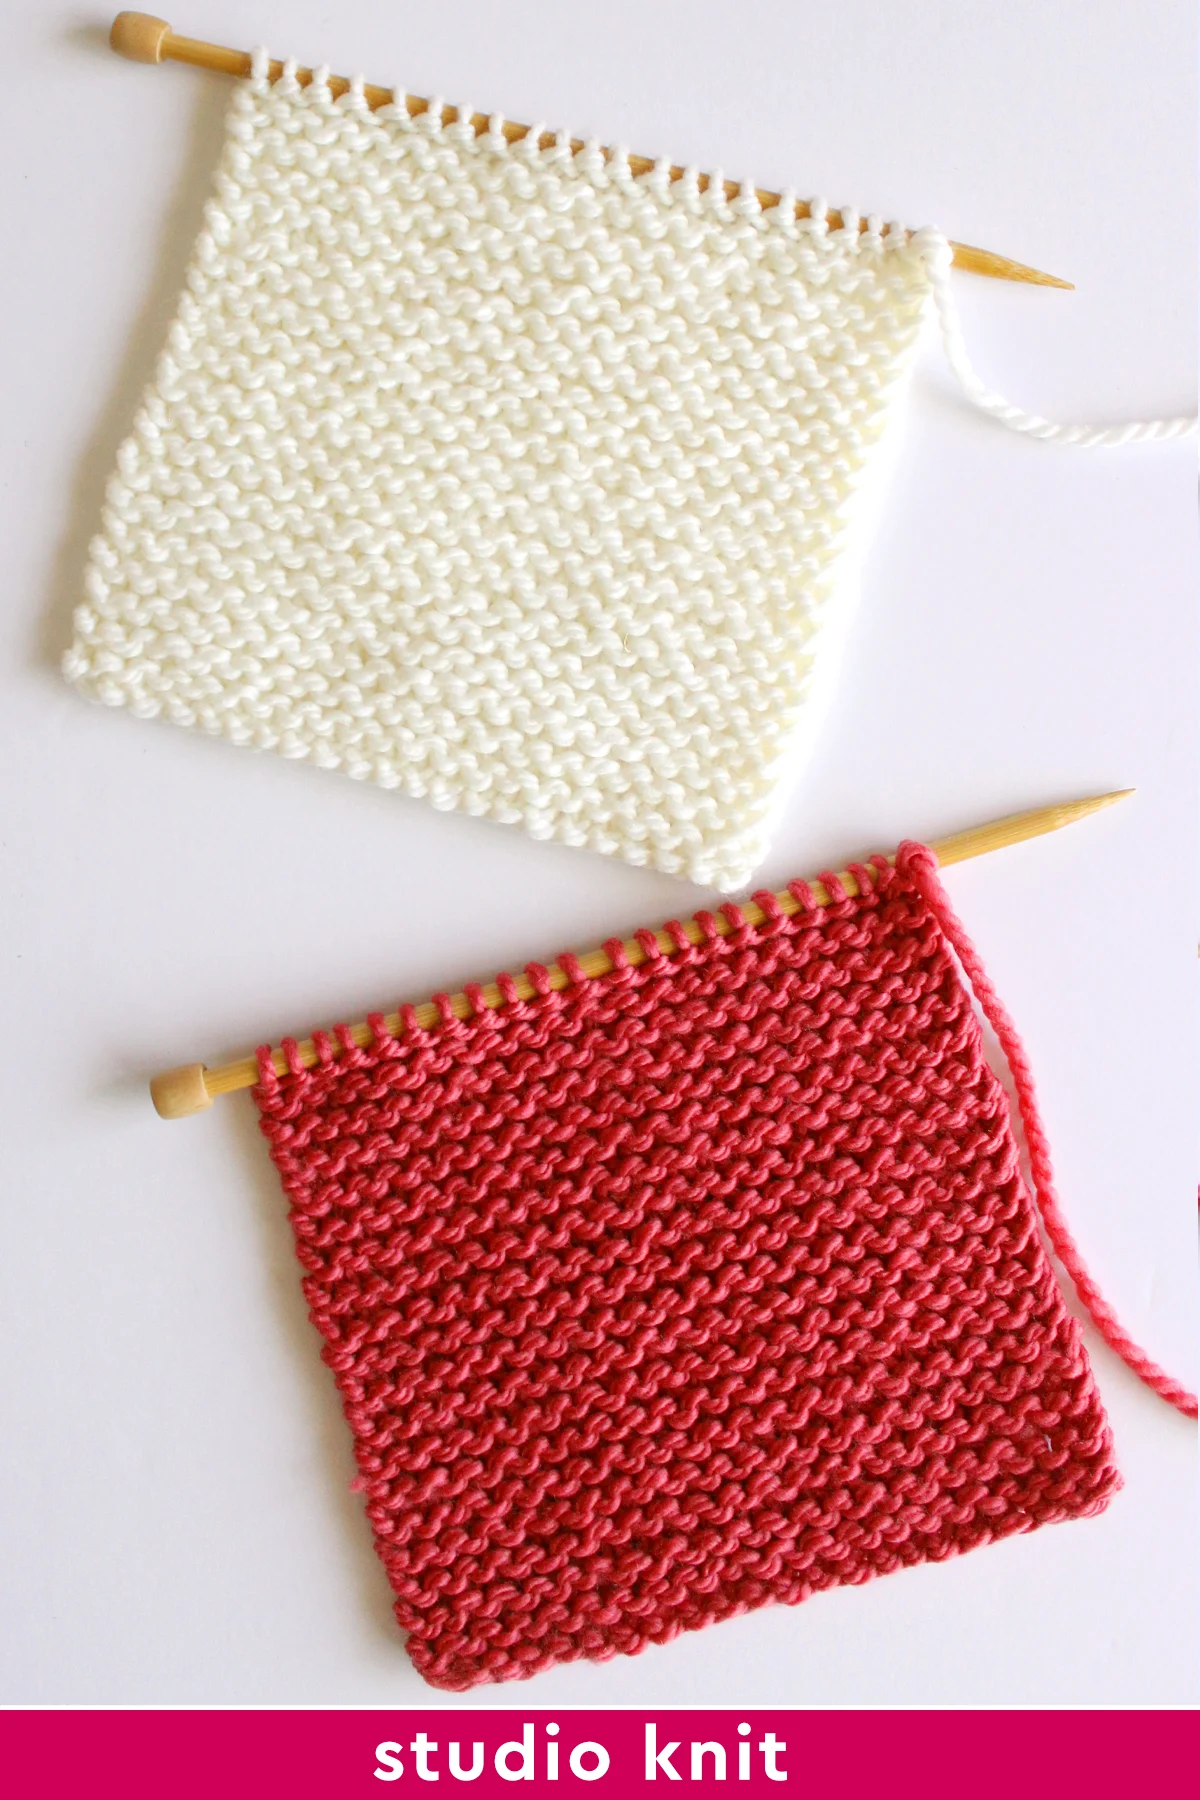 Two garter stitch knitting swatches in white and pink color yarn.